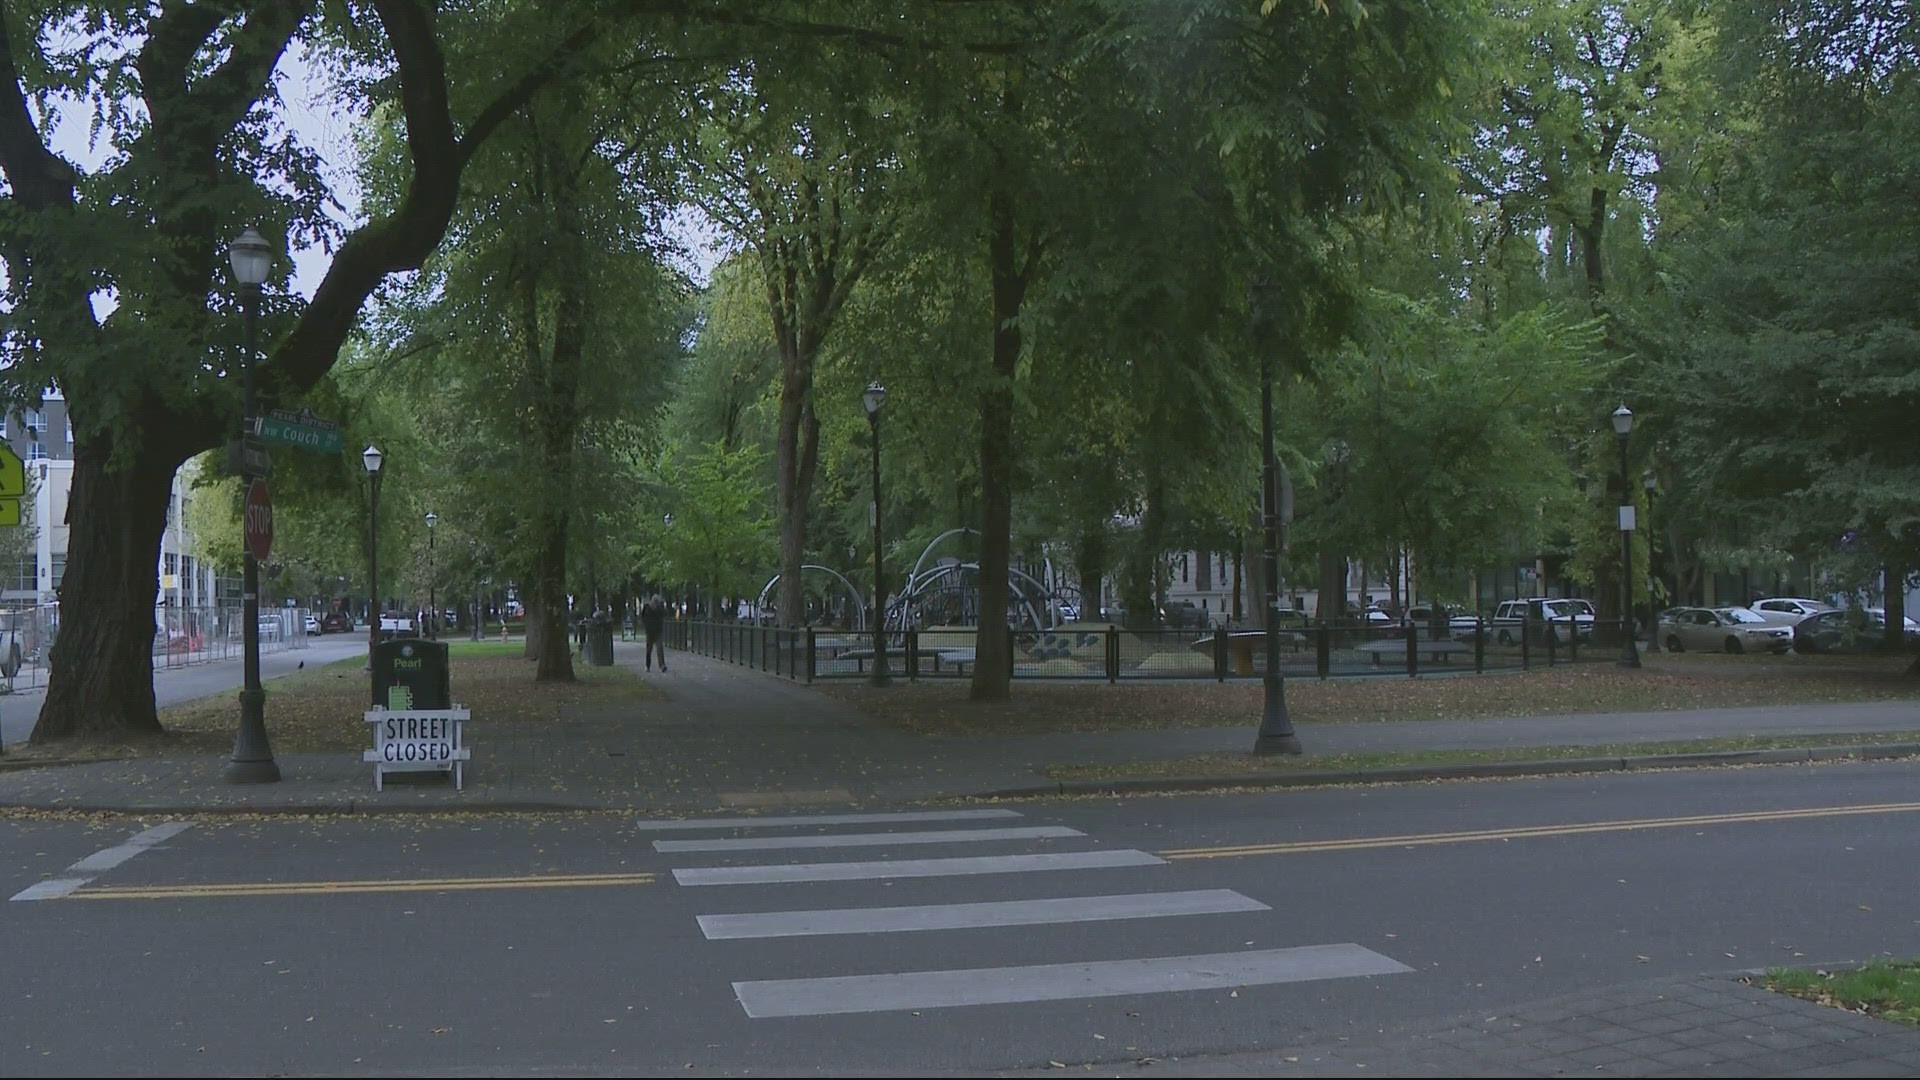 Eight people overdosed near the North Park Blocks — four were taken to the hospital. Portland Fire said they were all in their late teens or early 20s.